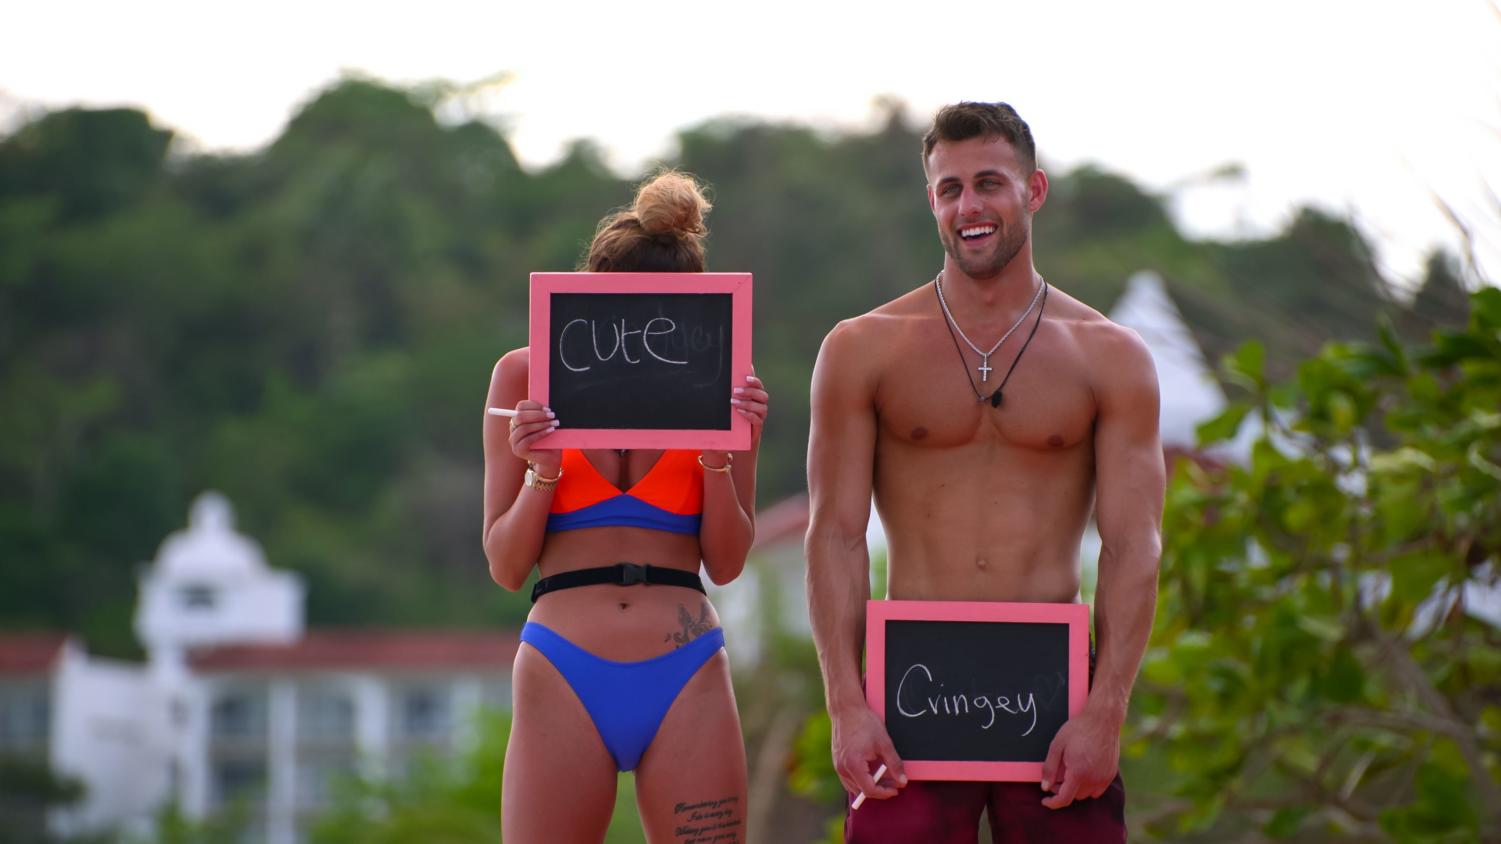 Perfect Match's Shayne & Mitchell Argue About Chloe Veitch